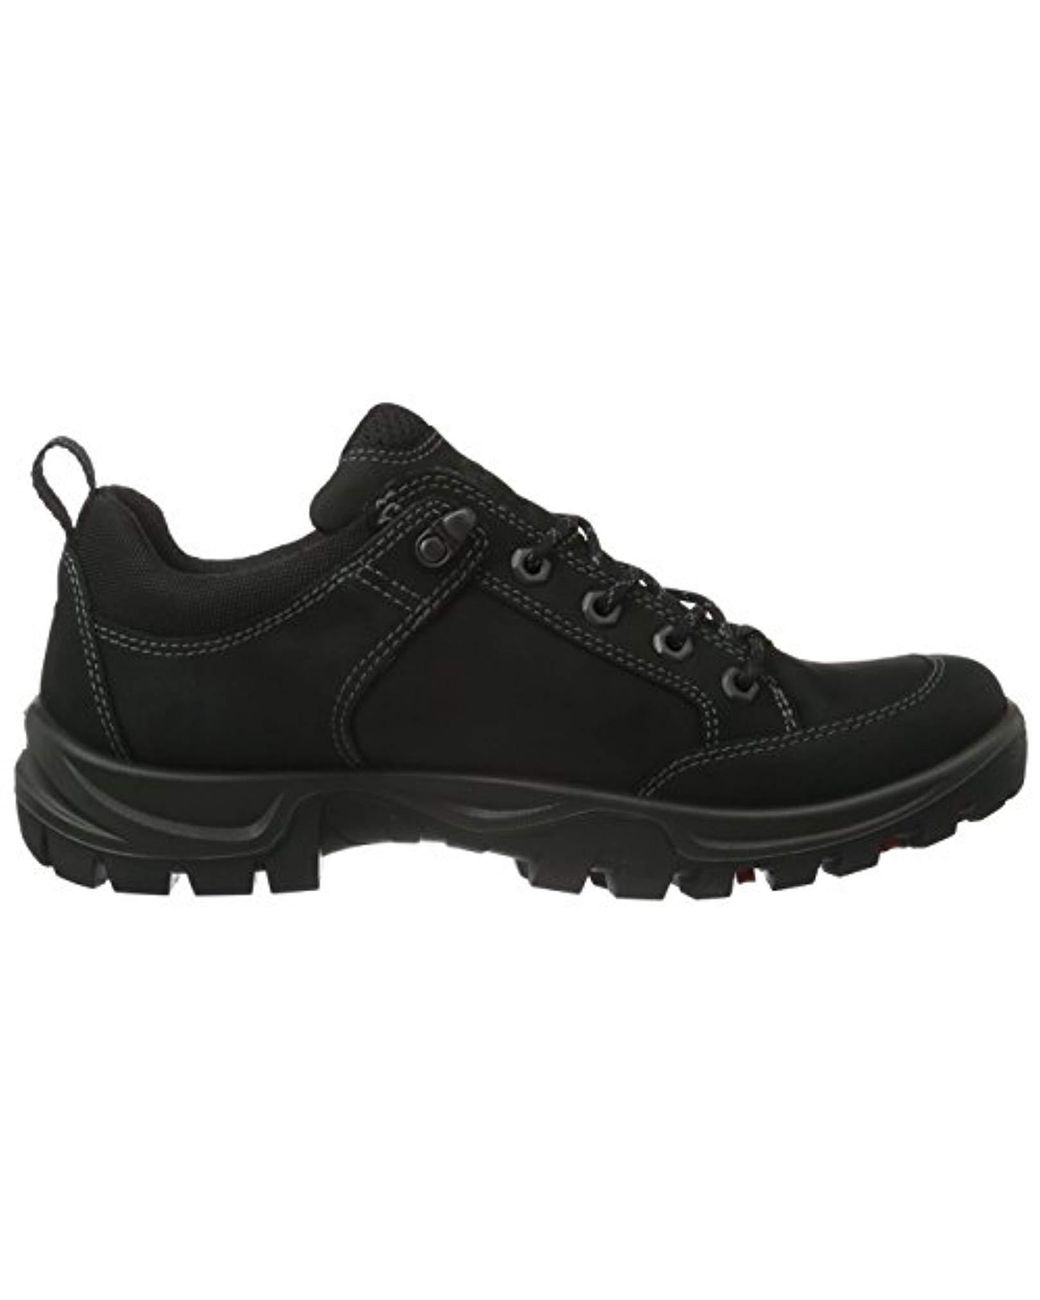 Xpedition Iii Hiking Shoe in Black for |